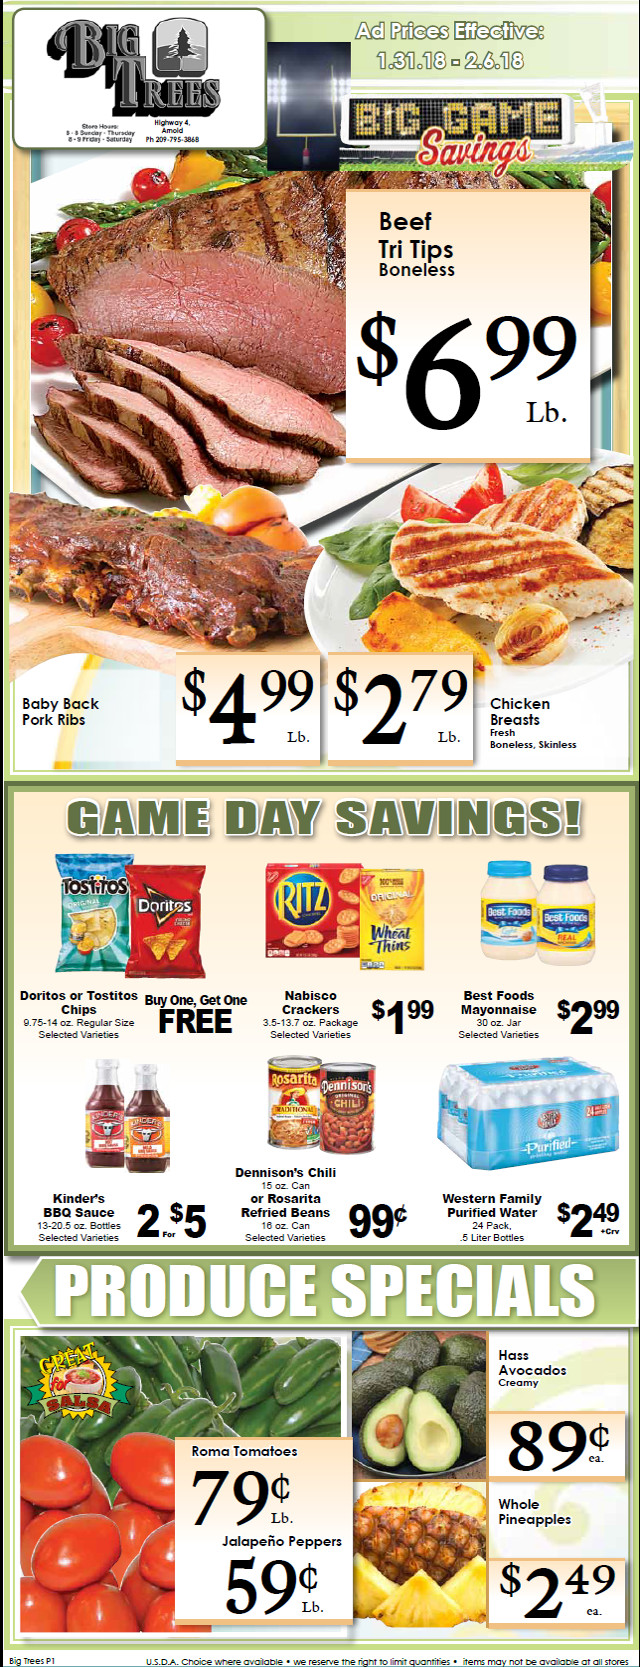 Big Trees Market Weekly Ad & Grocery Specials Through February 6th